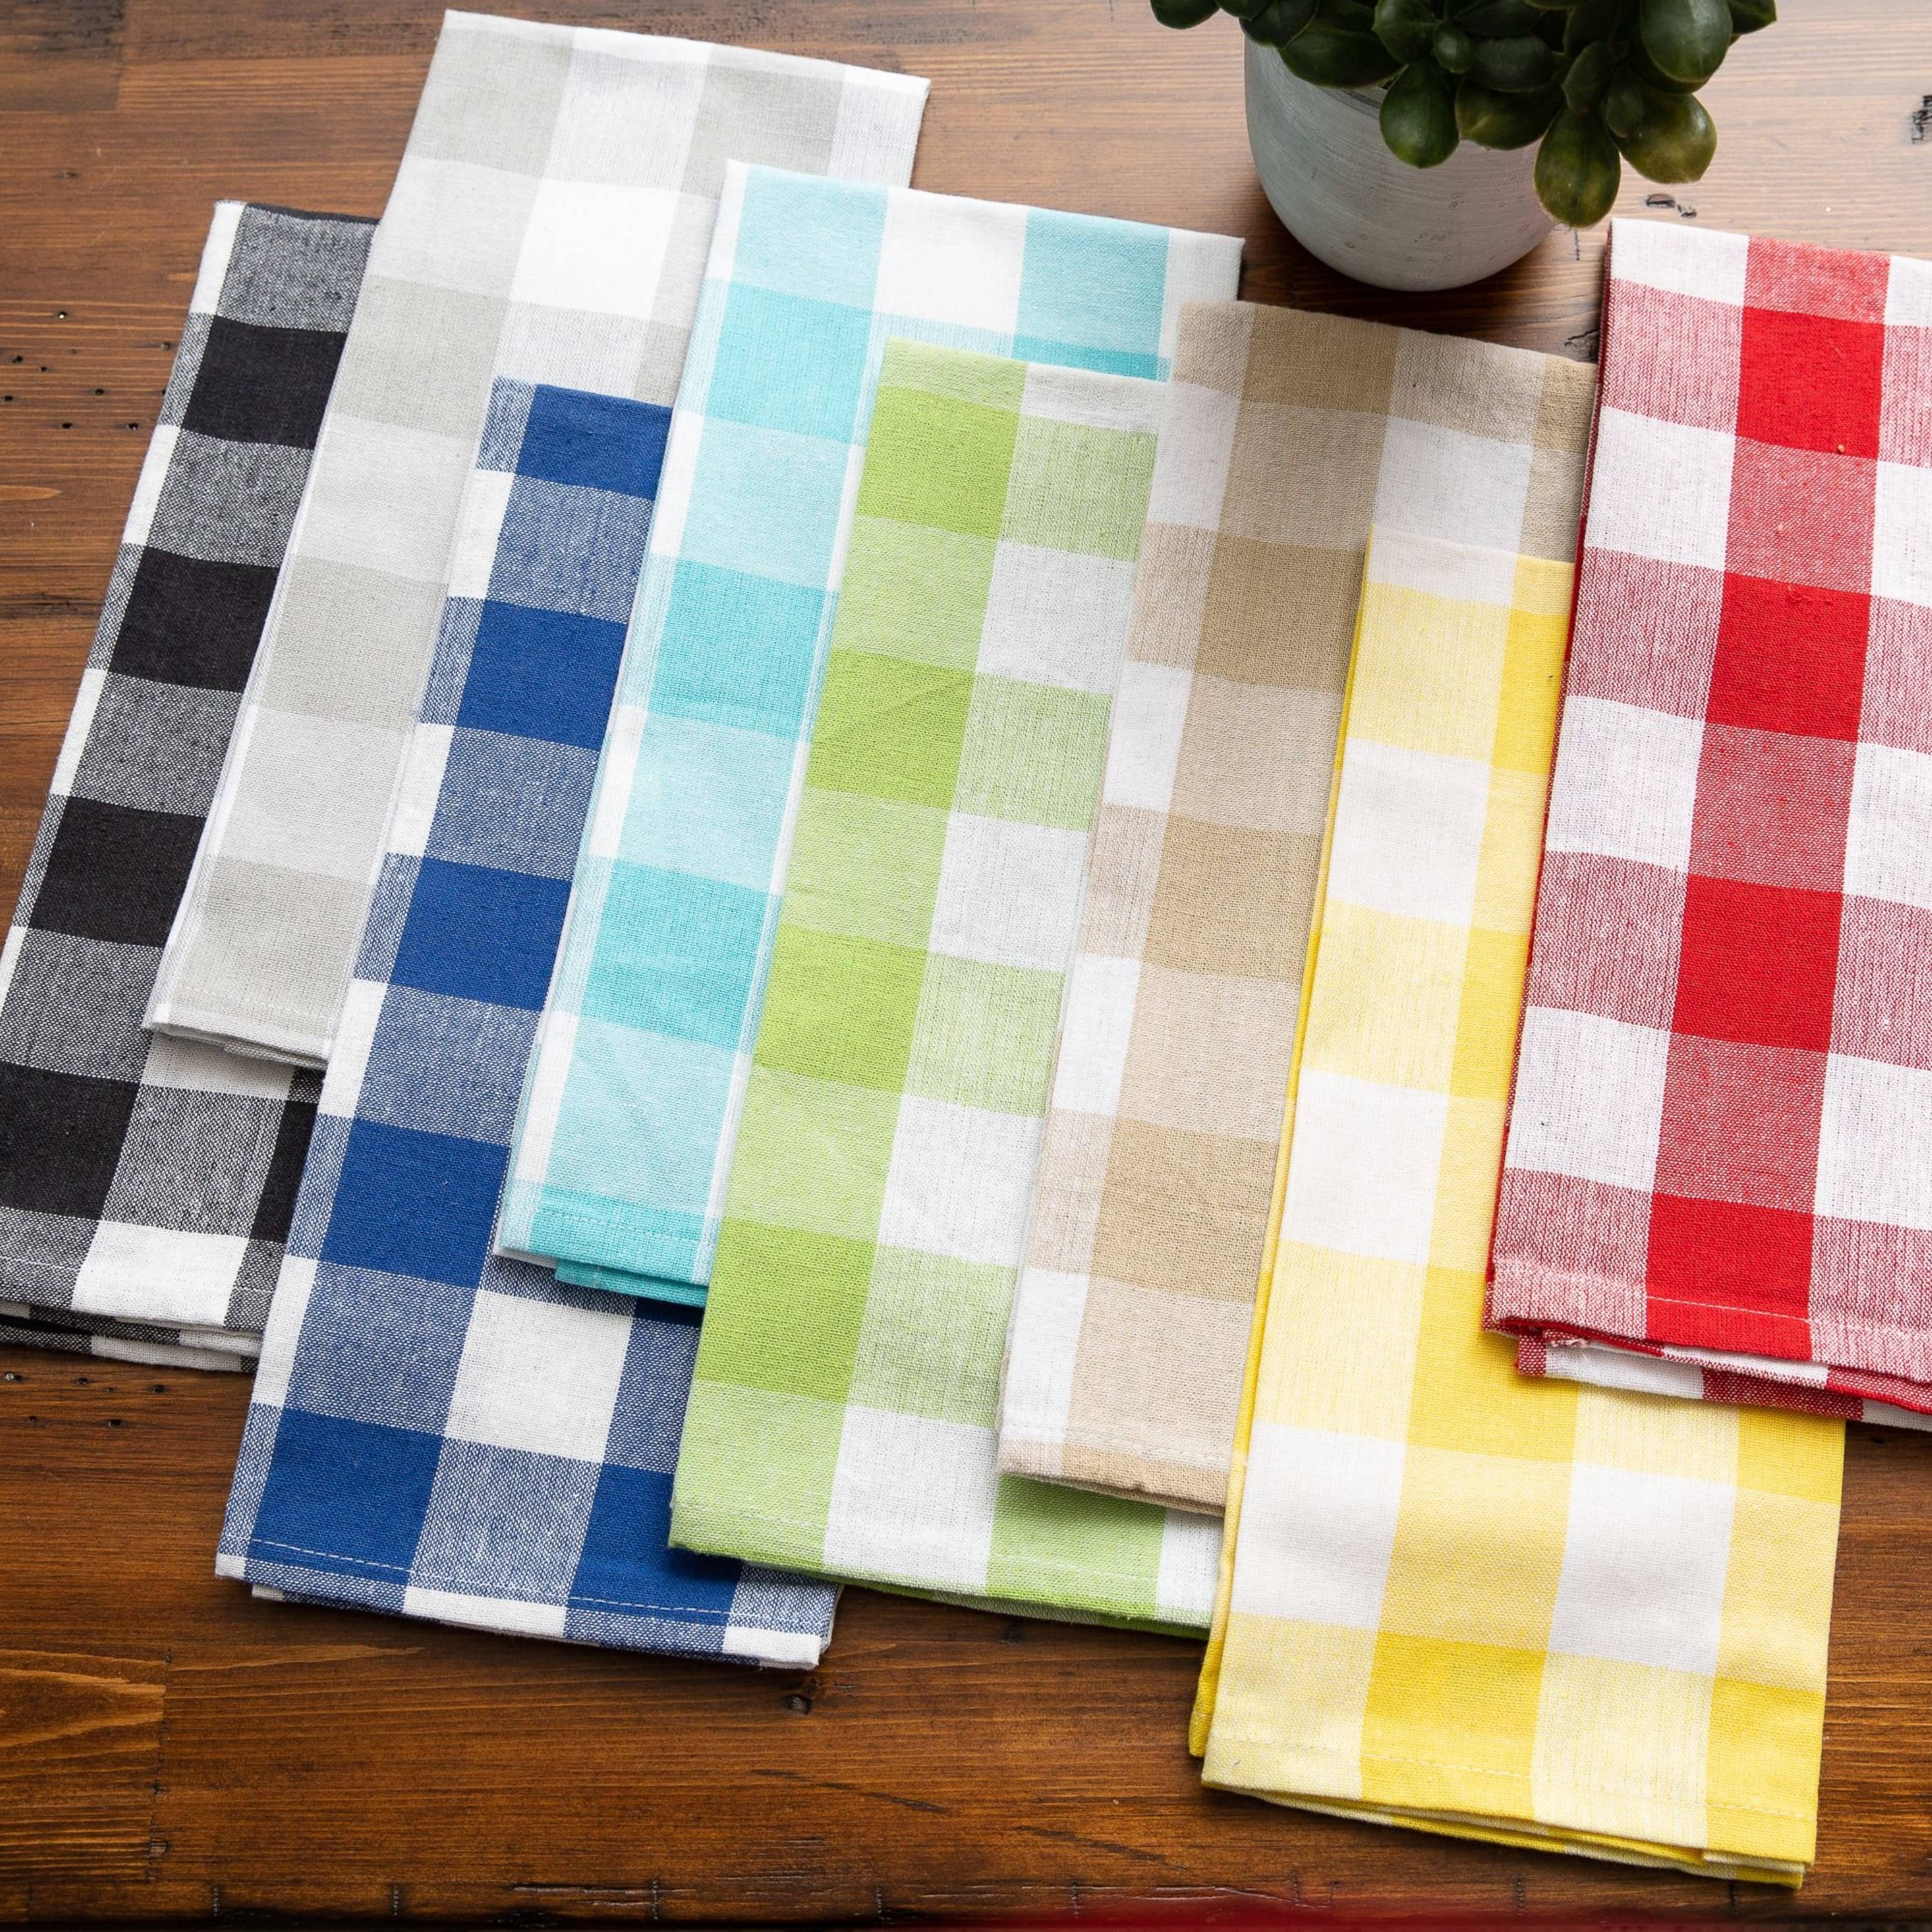 https://ak1.ostkcdn.com/images/products/is/images/direct/76e733c2363468302368cc7ae40e980a0cd93120/Fabstyles-Country-Check-Cotton-Kitchen-Towel-Set-of-4.jpg